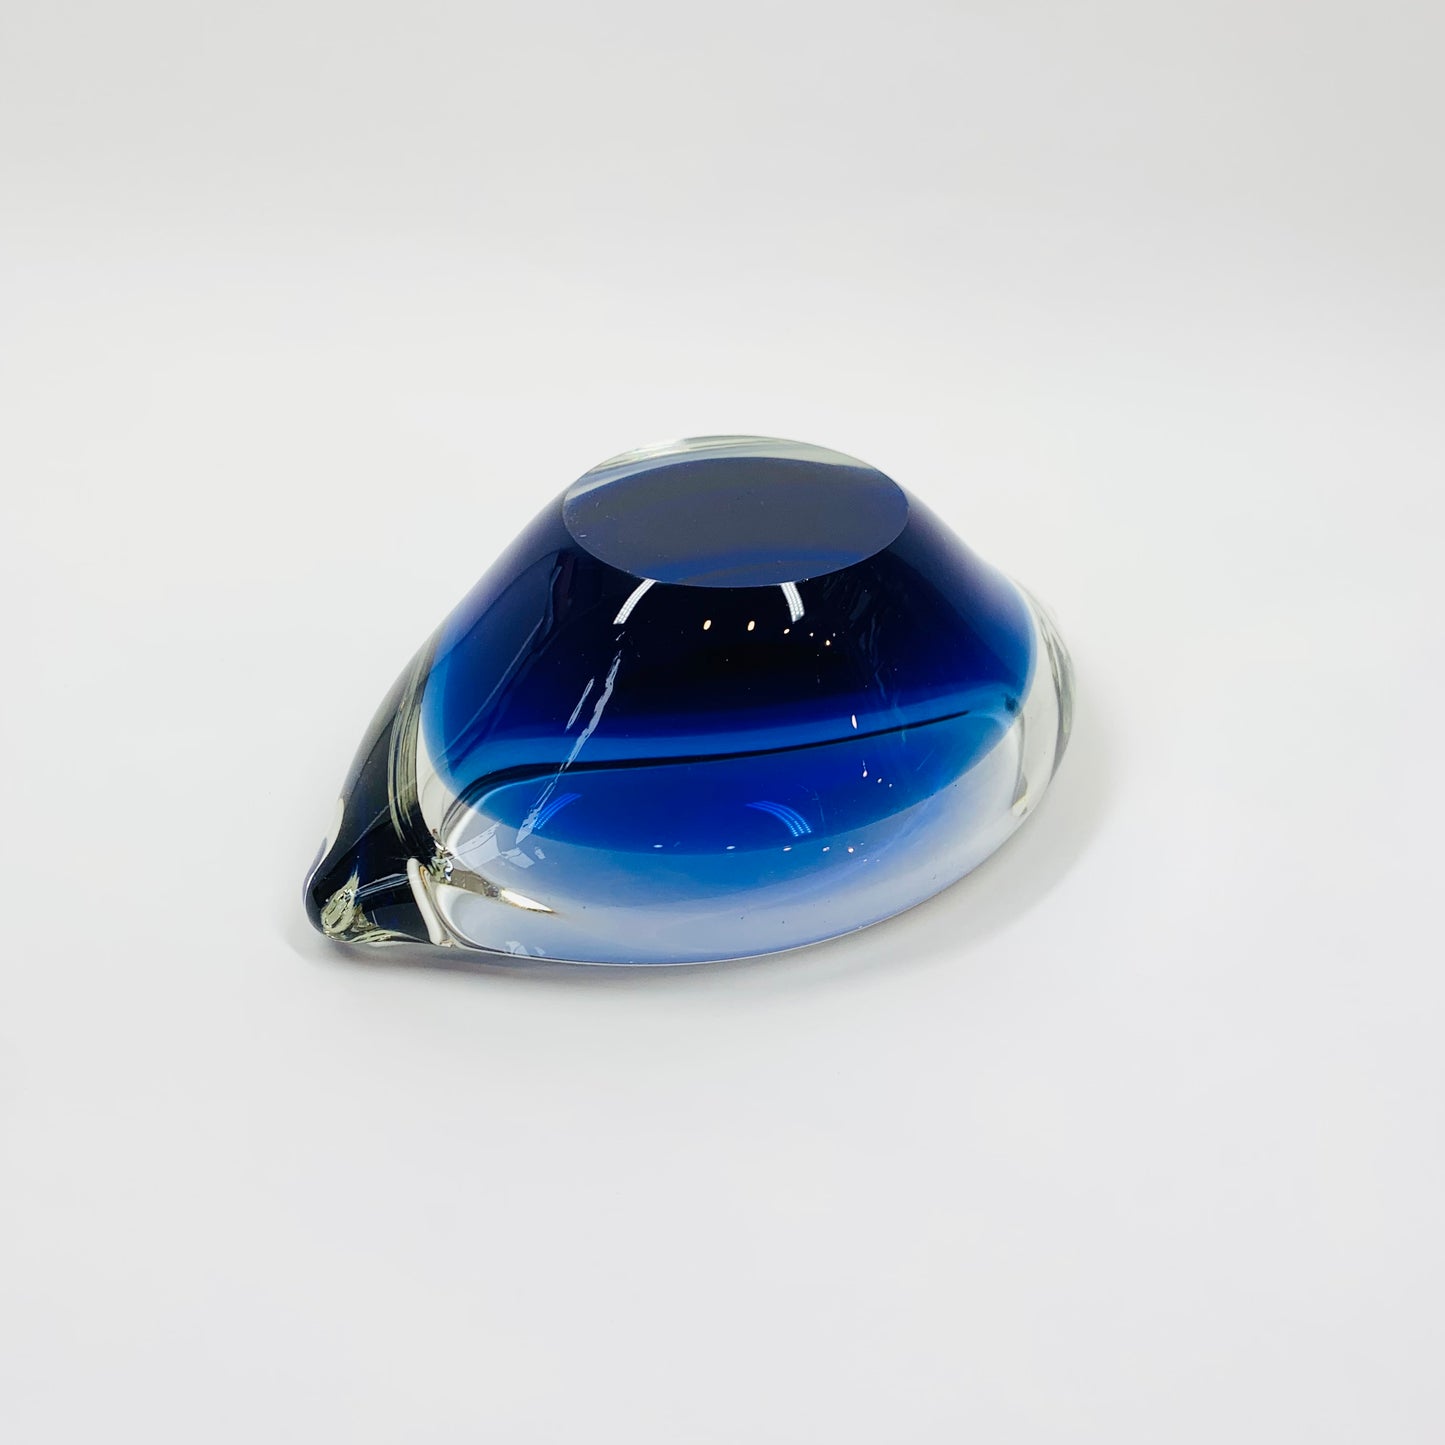 Stunning and rare 1960s Murano blue sommerso glass ashtray/bowl